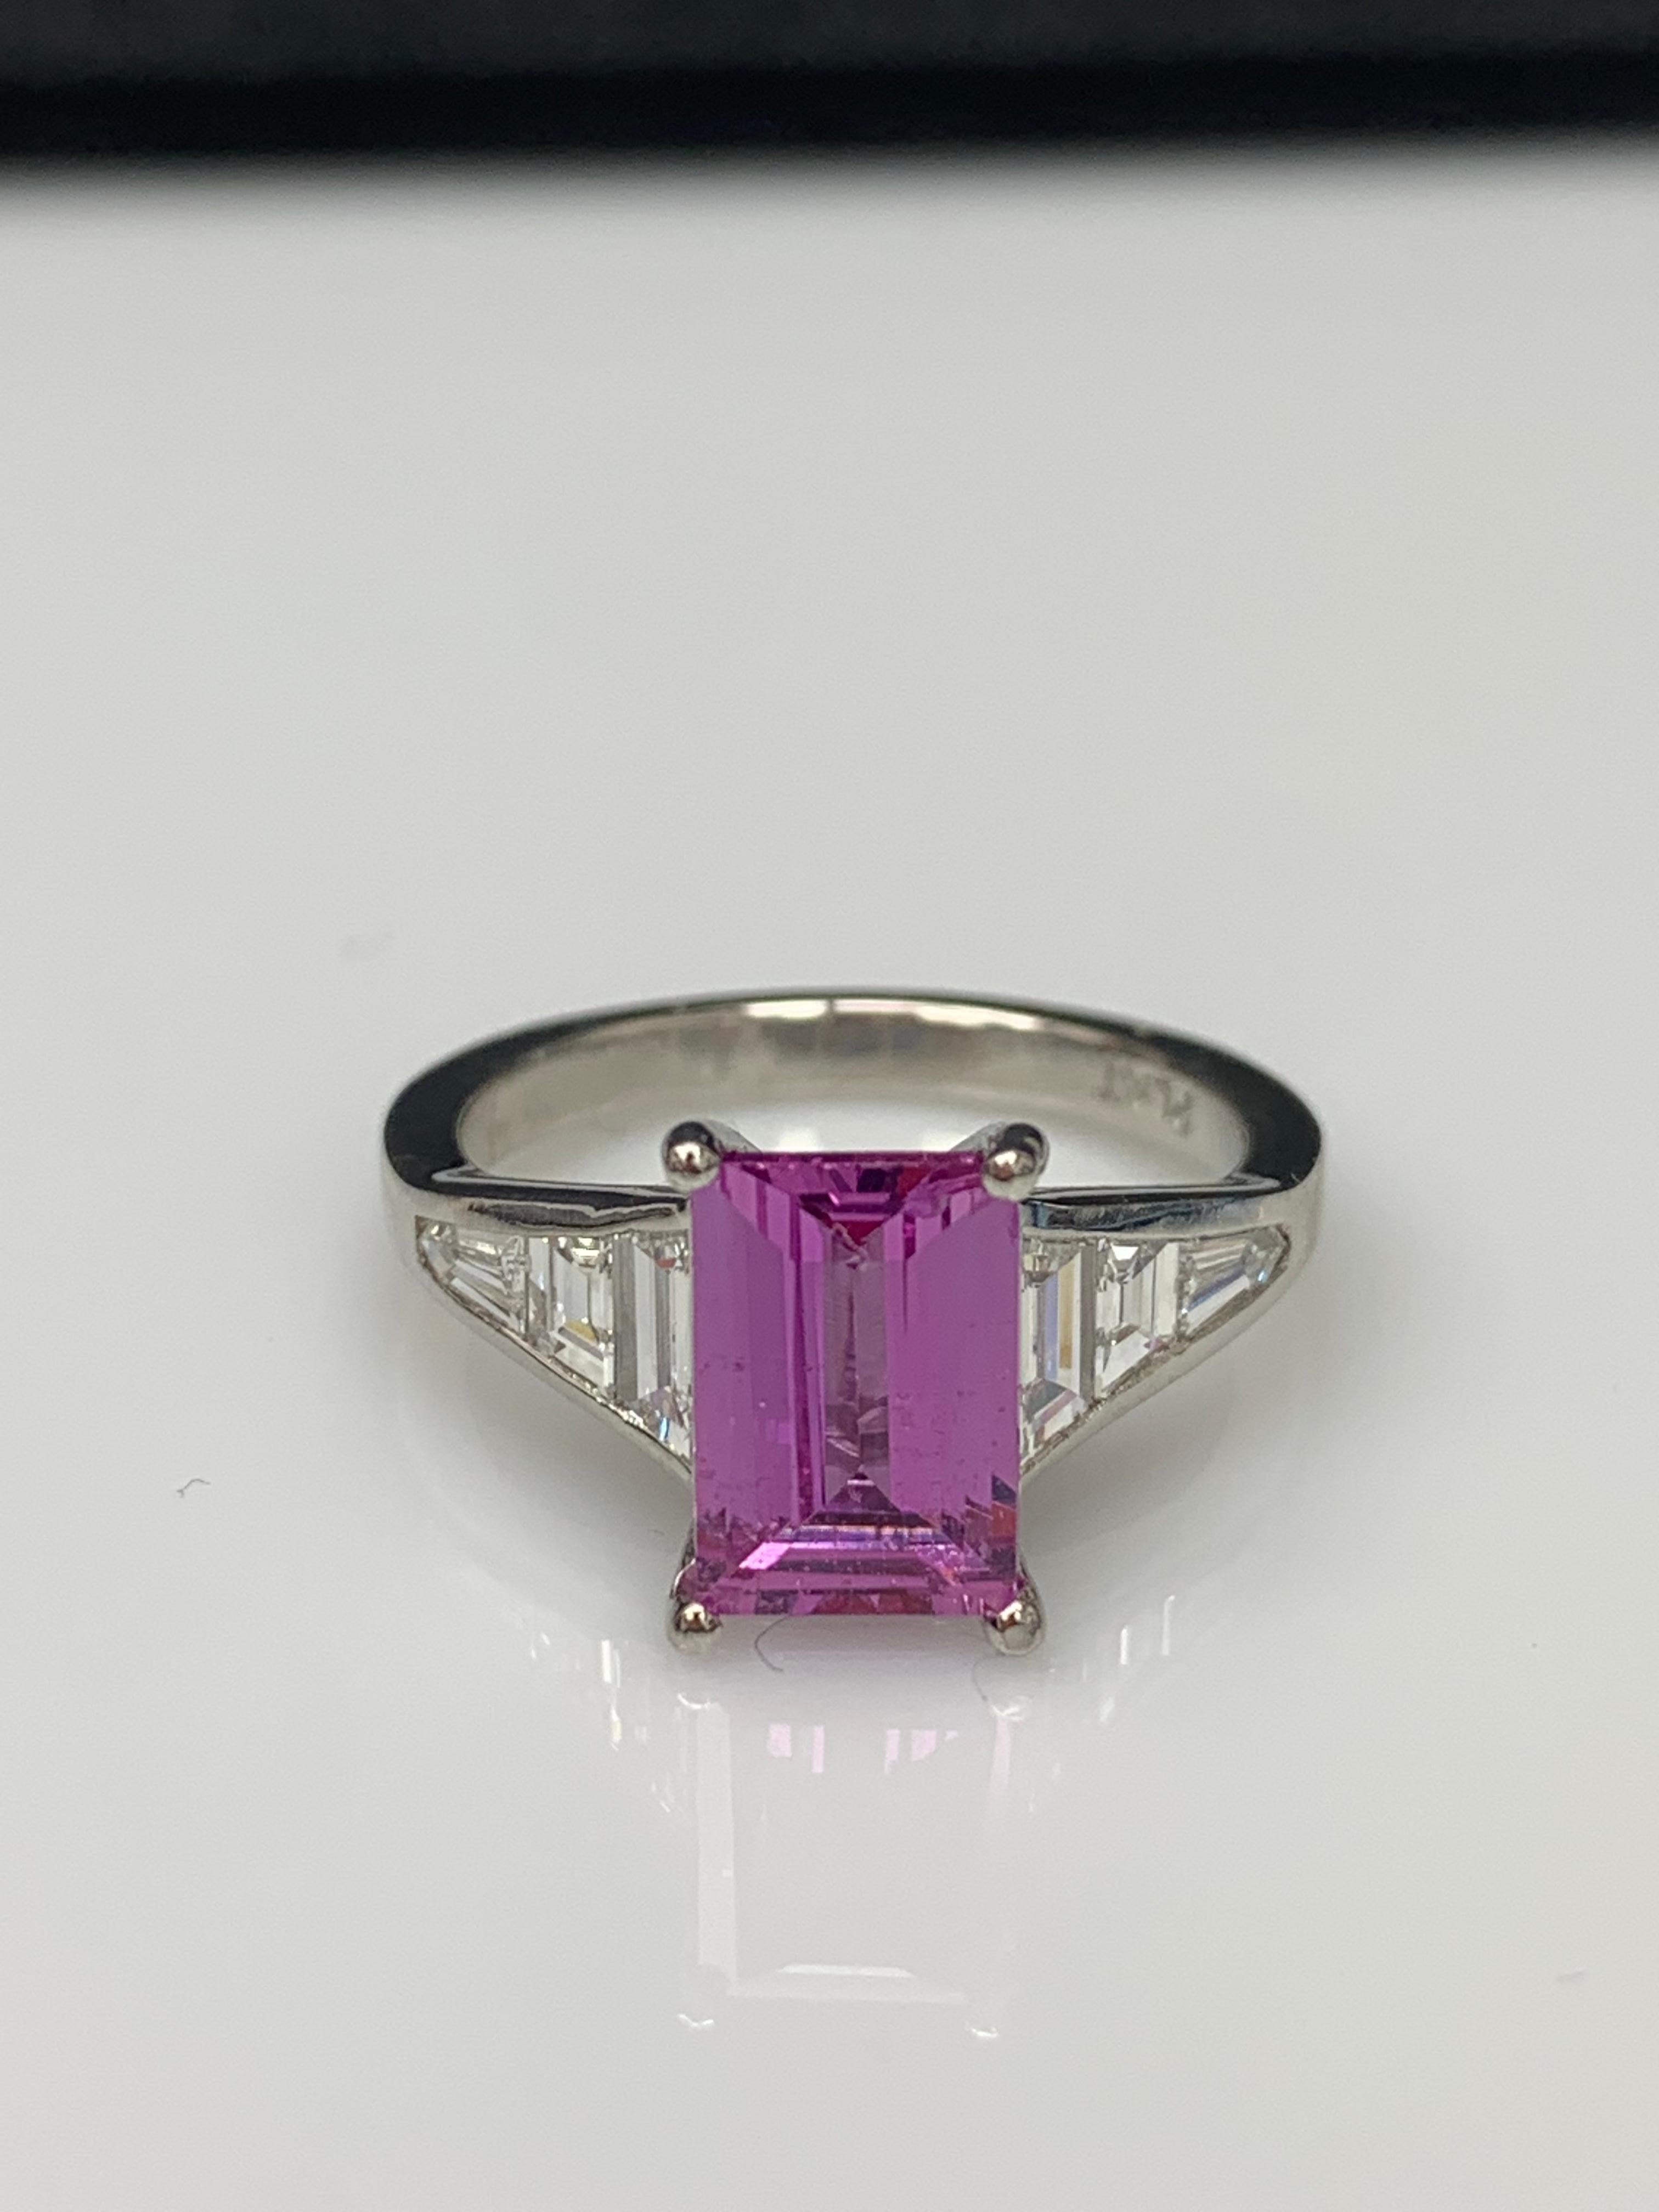 A stunning well-crafted engagement ring showcasing a 2.21-carat Cushion Cut Pink Sapphire. Flanking the center diamond are perfectly matched graduating step-cut diamonds, channel set in a polished platinum mounting. 6 Accent diamonds weigh 0.76